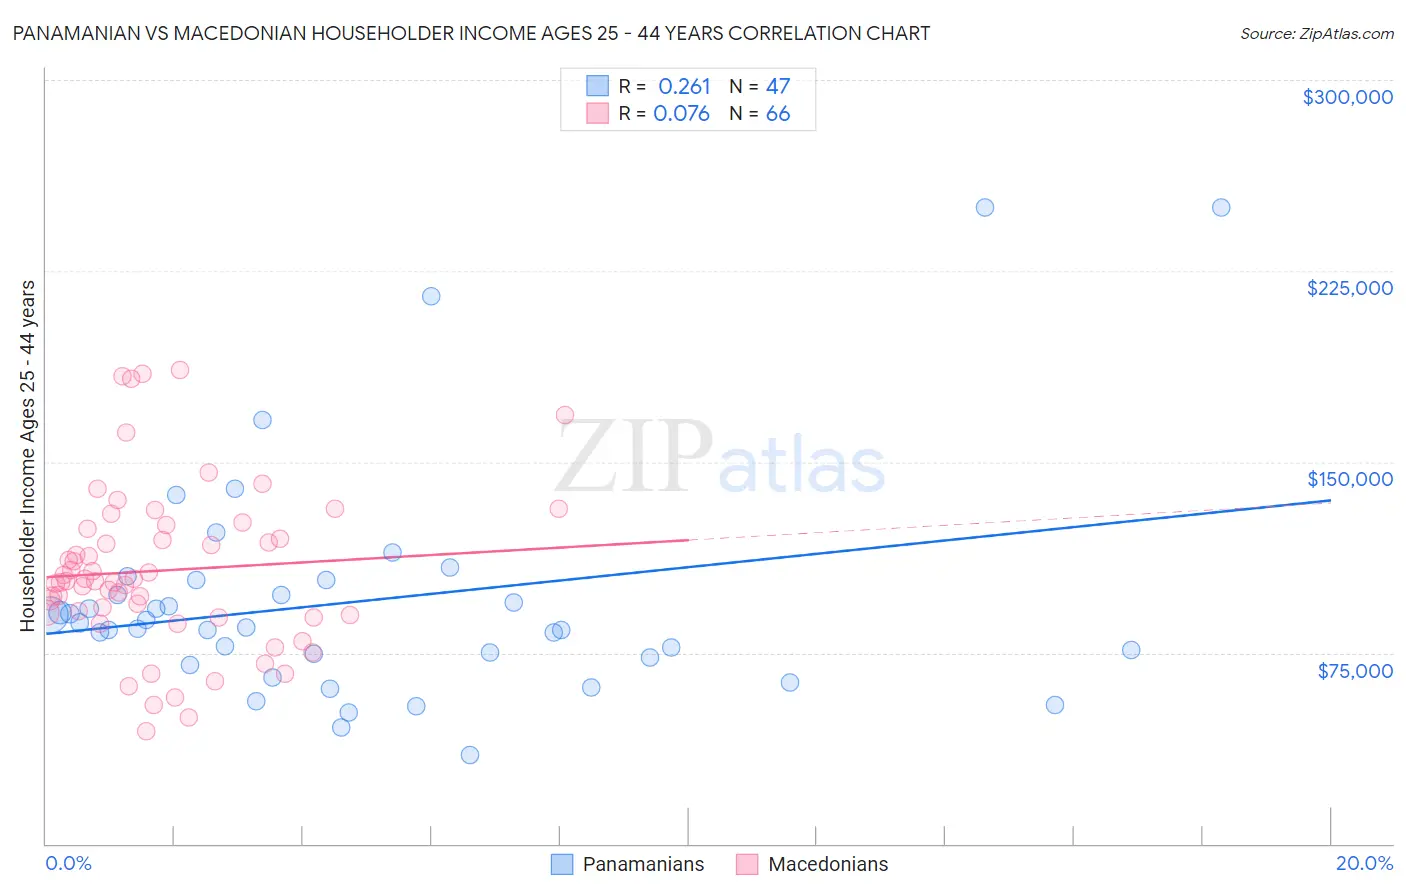 Panamanian vs Macedonian Householder Income Ages 25 - 44 years